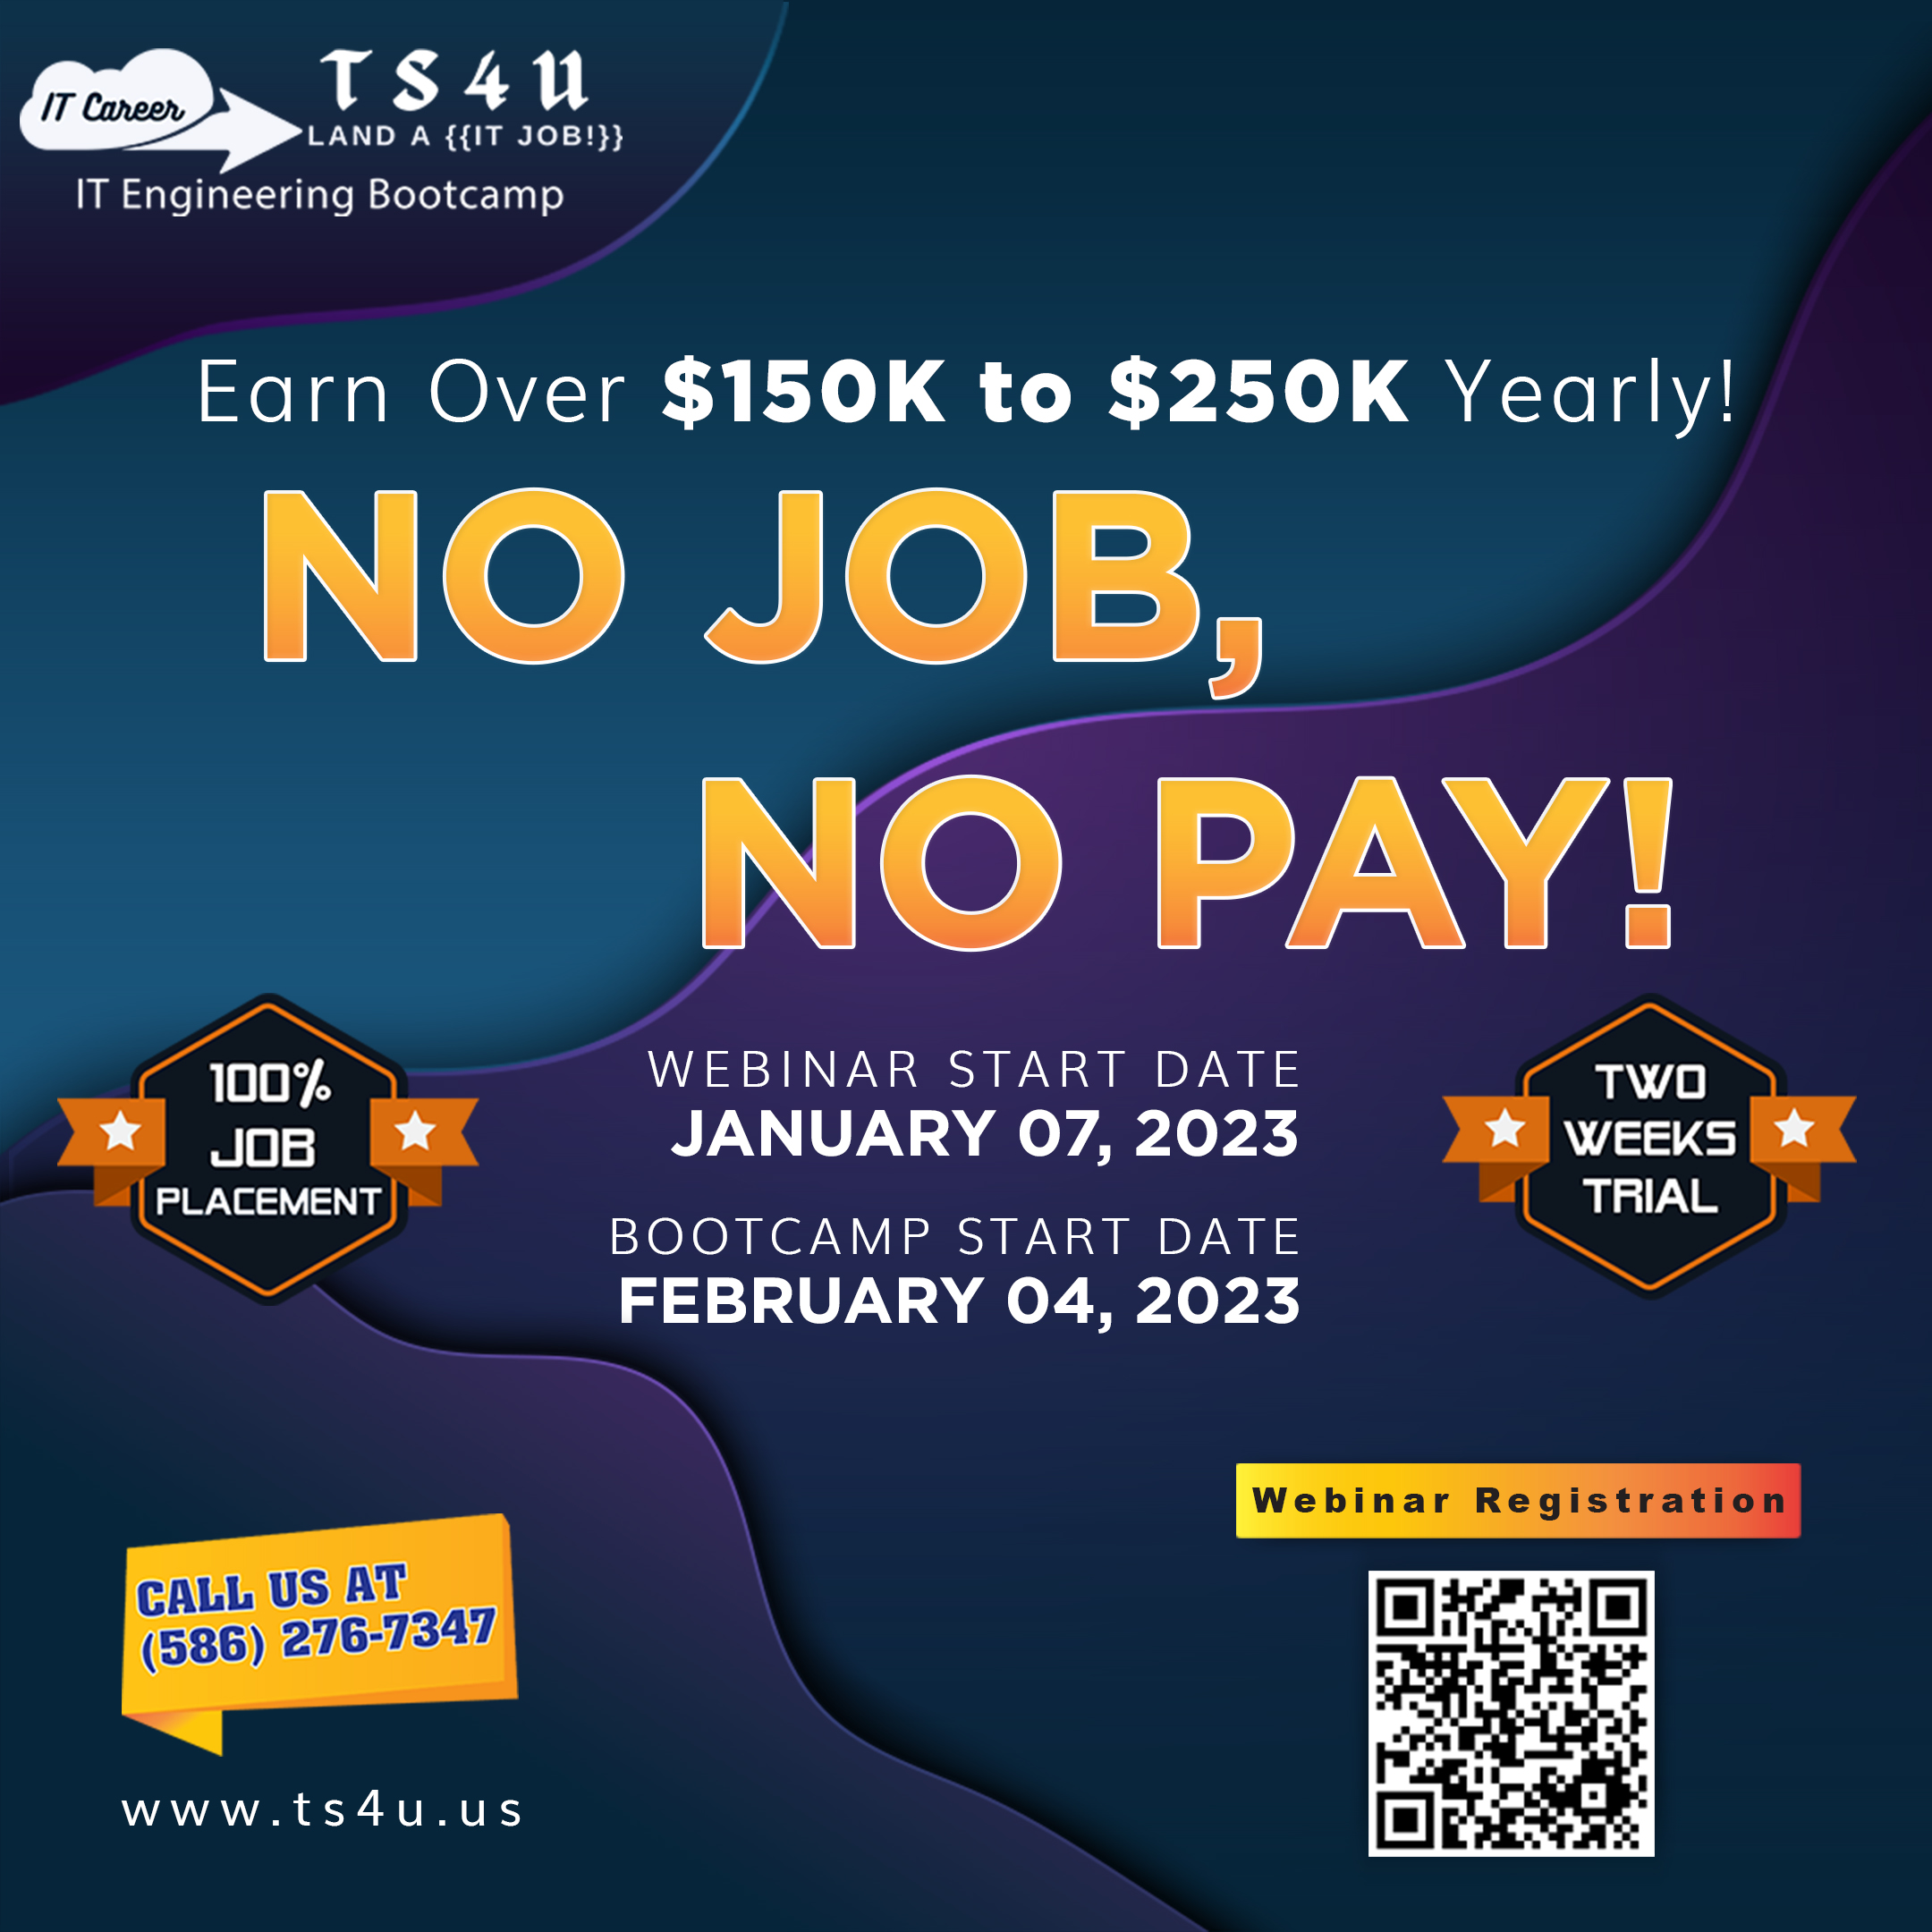 No Job No pay... TS4U provides the excellent results-oriented Bootcamp for IT career Development